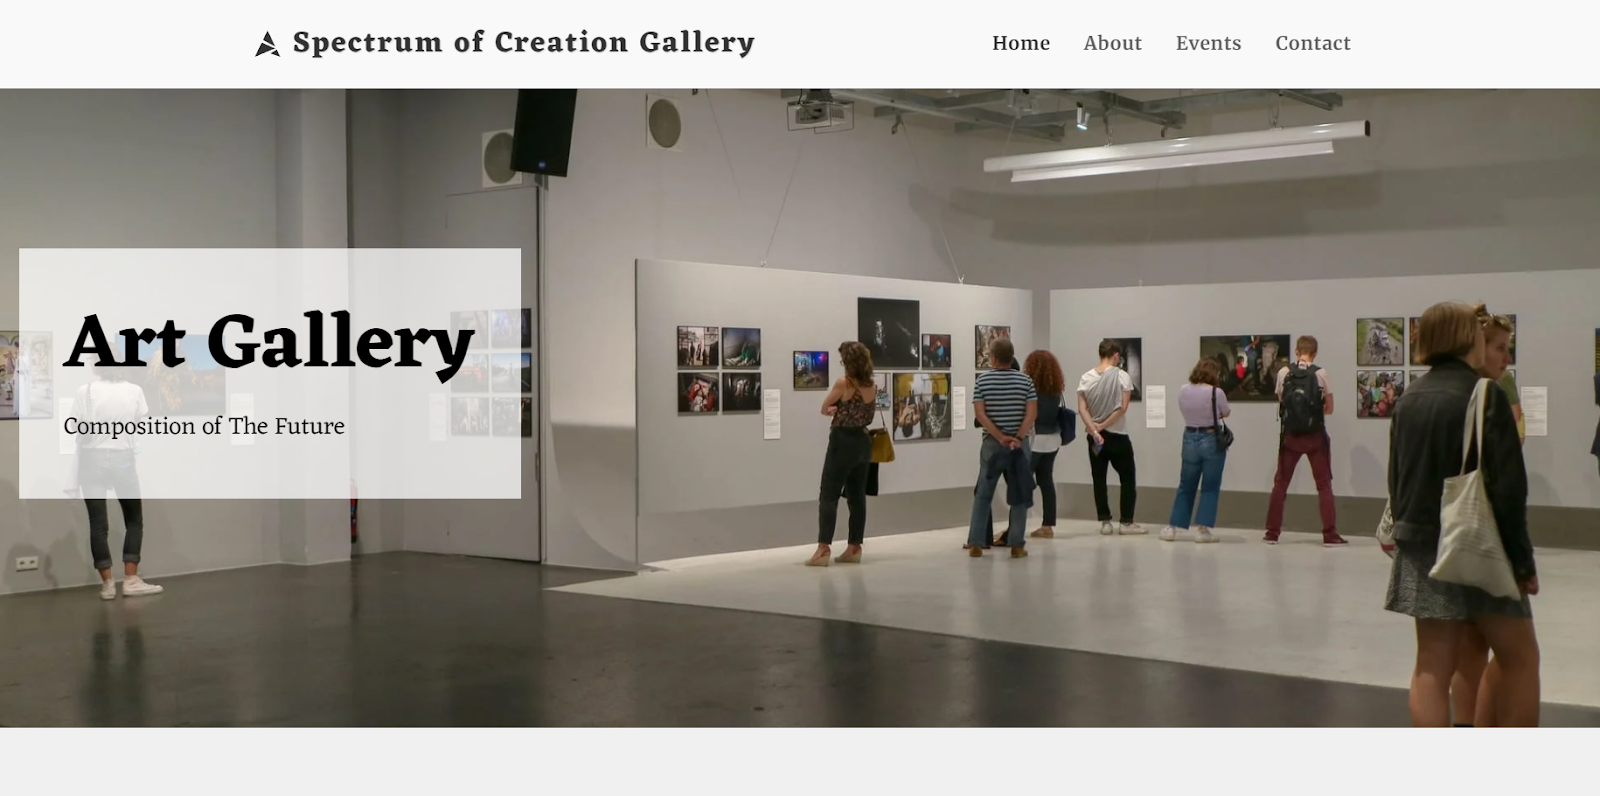 SITE123's "Spectrum of Creation Gallery" template